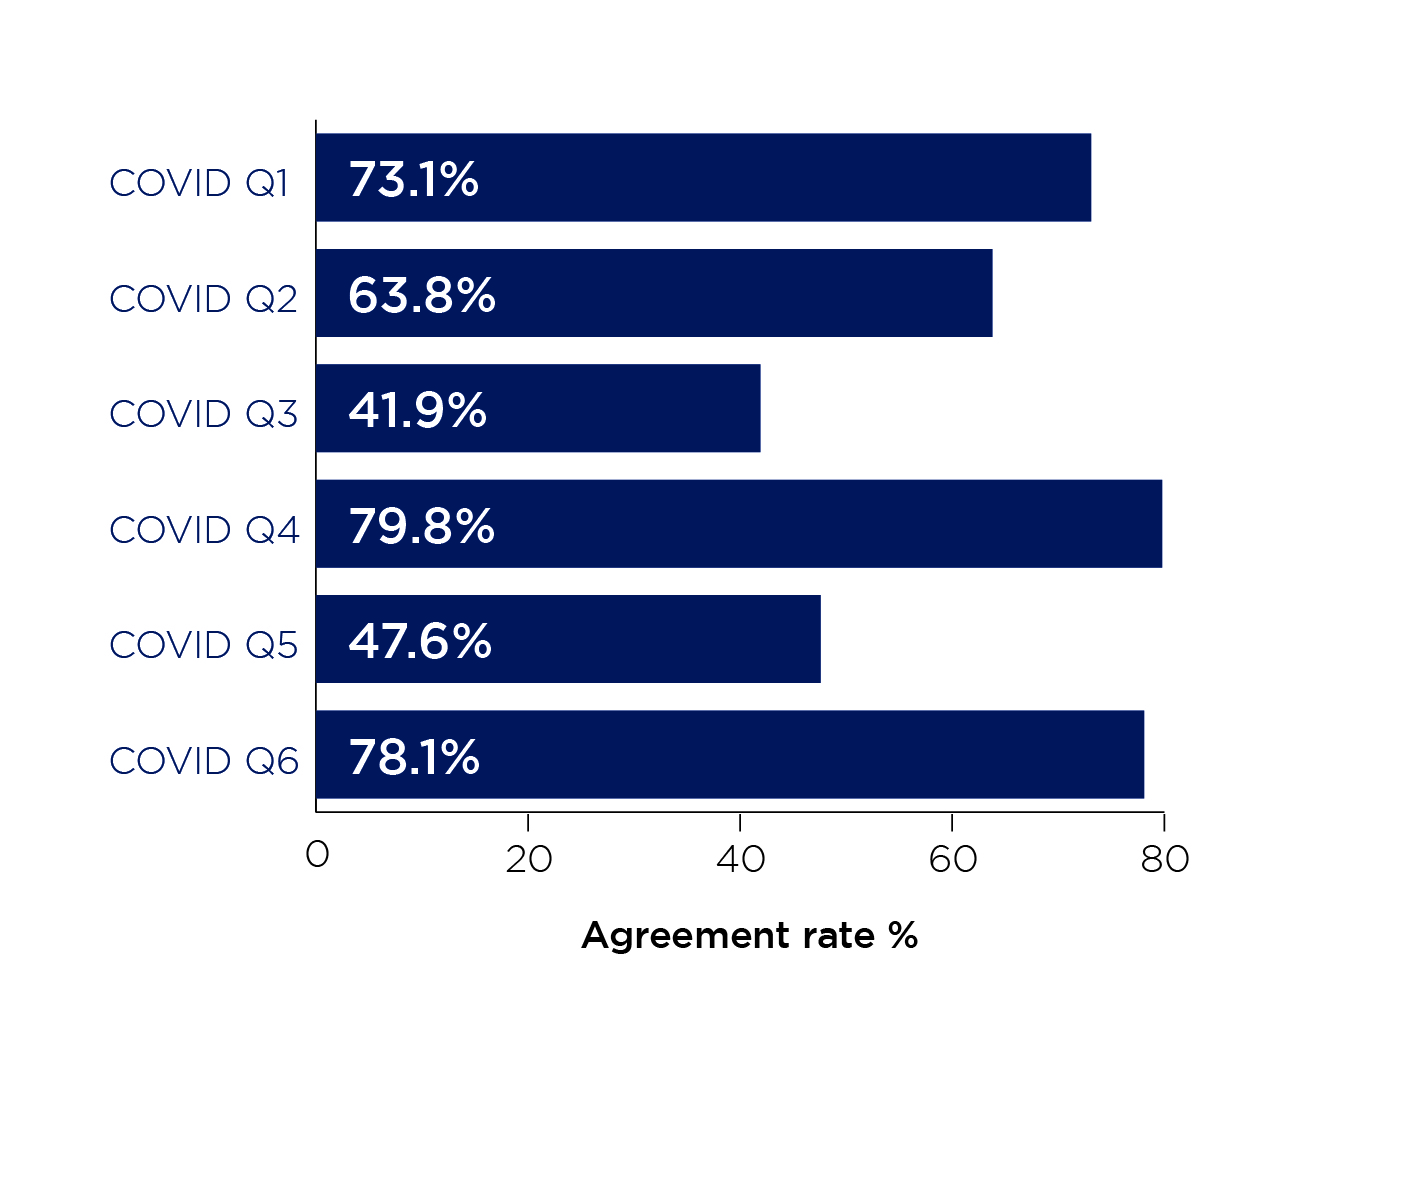 Figure 4: Overall agreement rate for covid-related questions